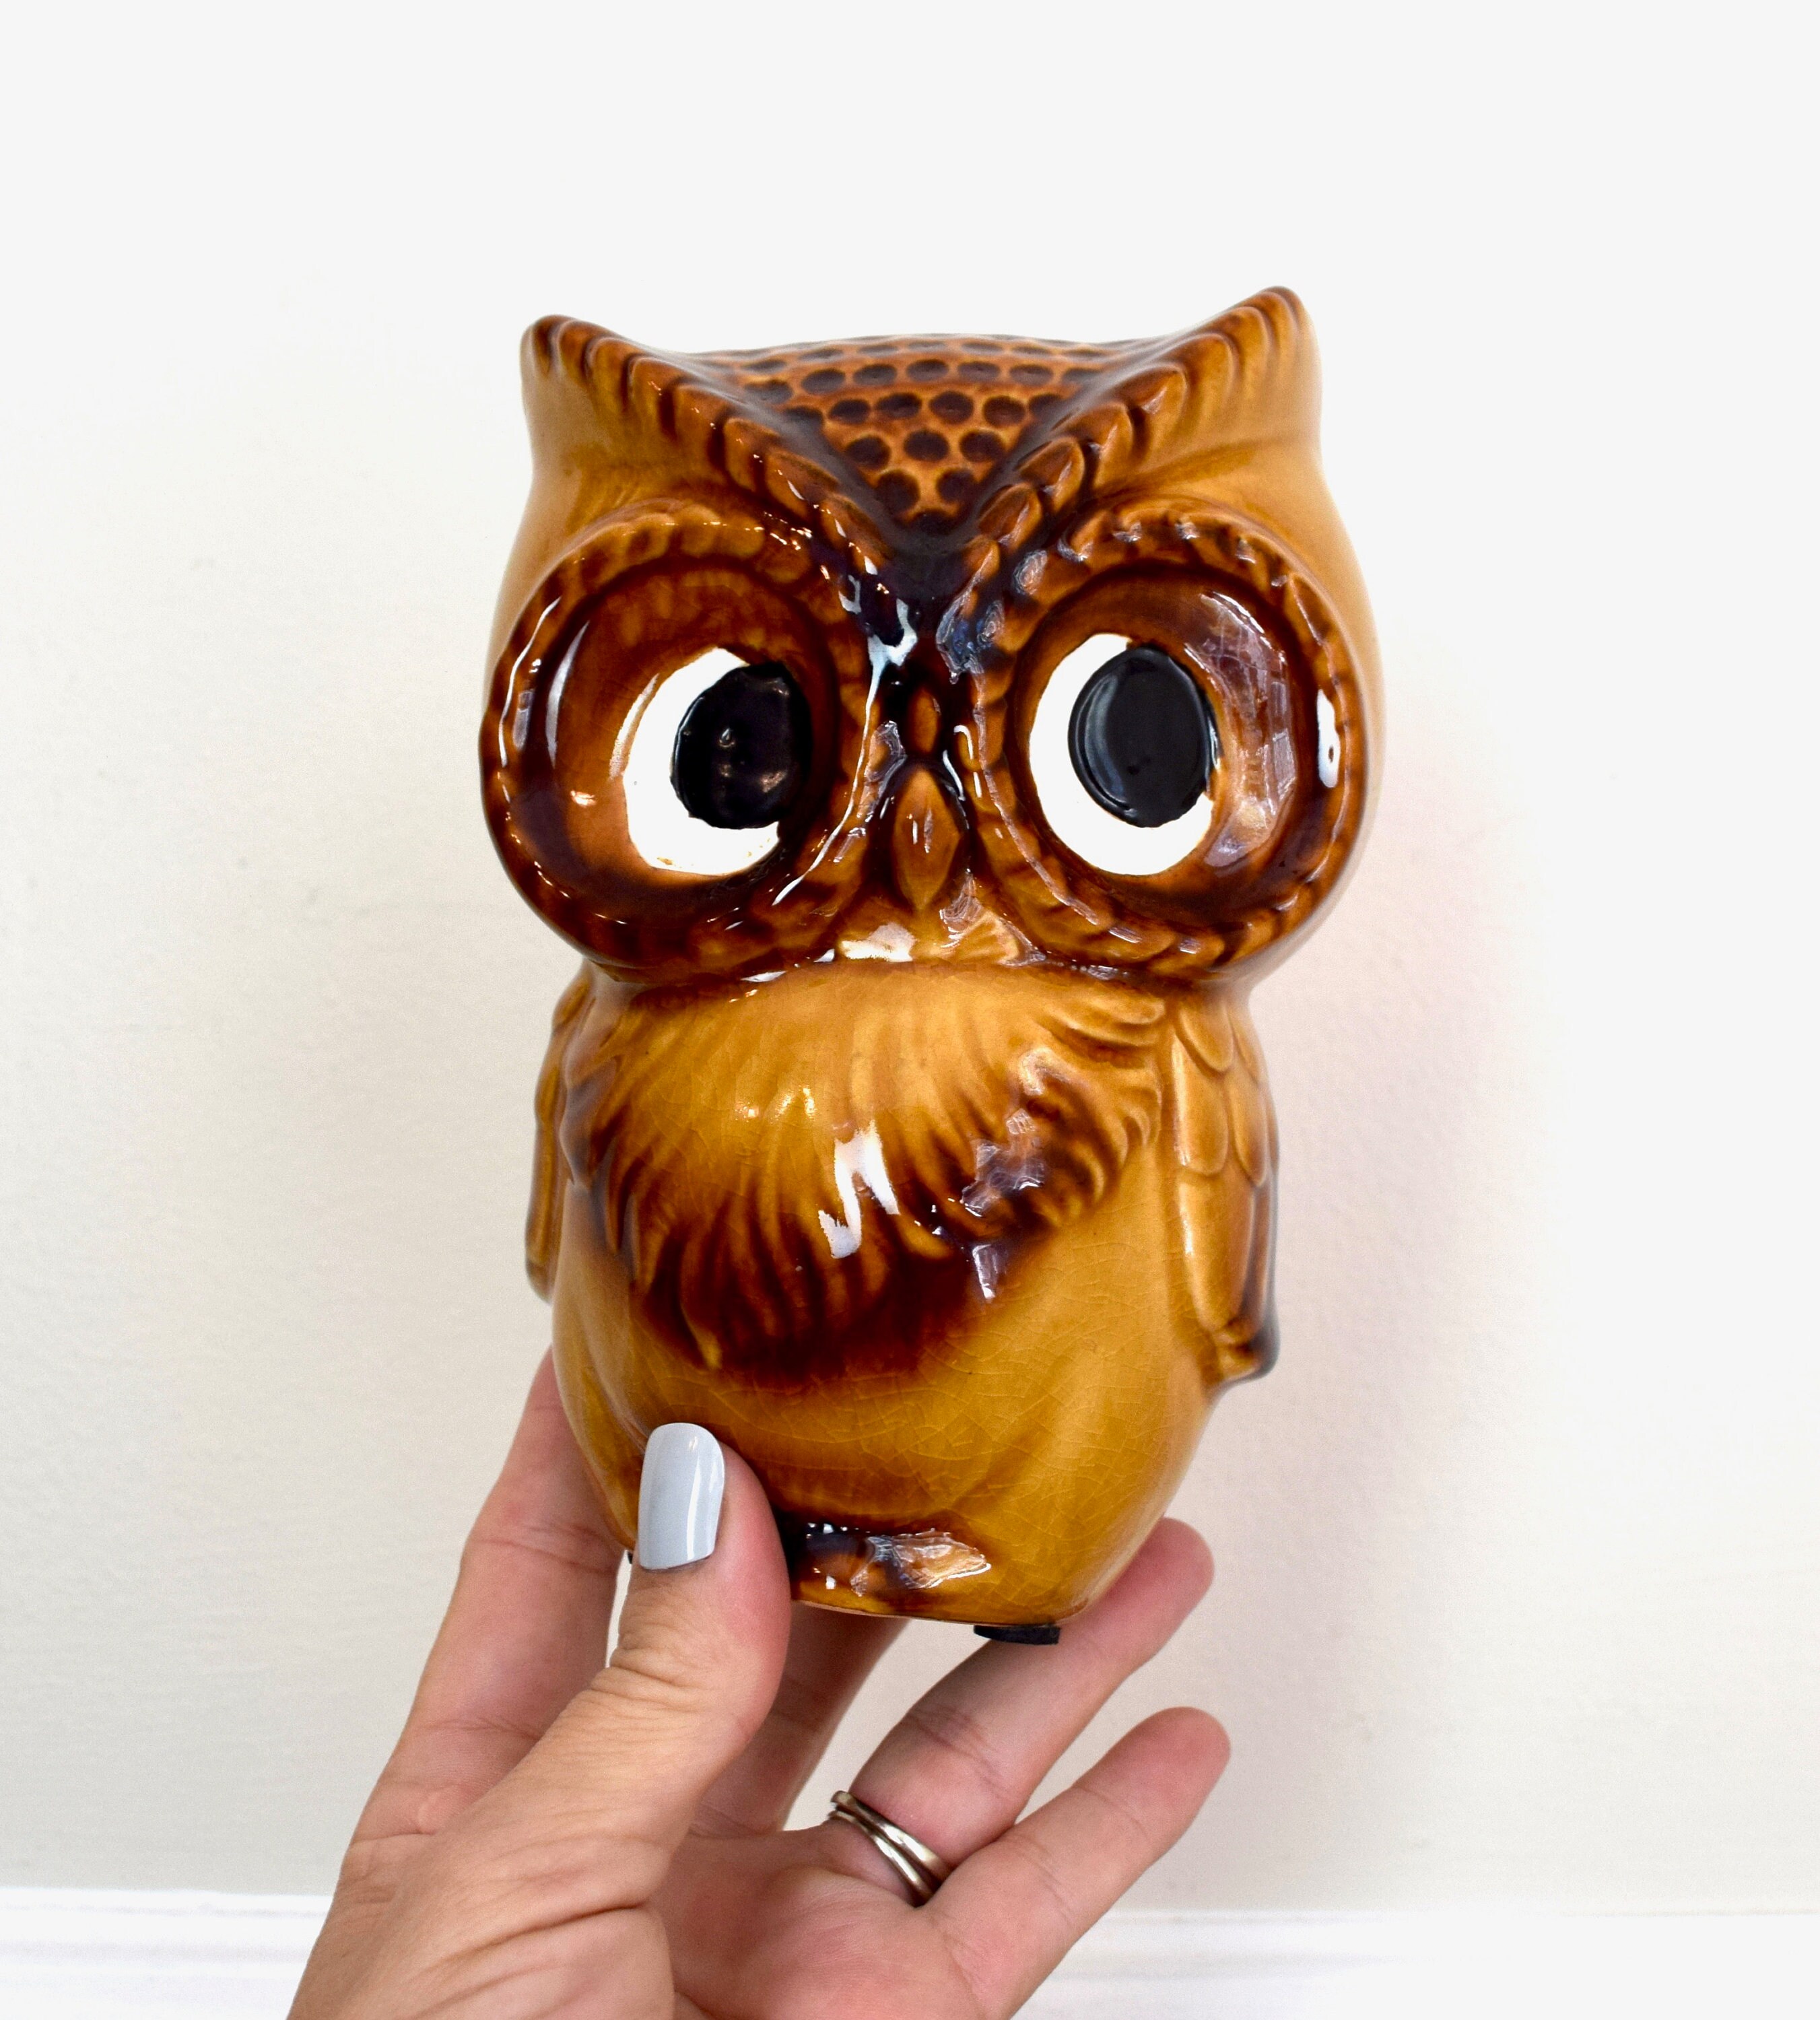 Coin Bank Decor New Brown OWL CERAMIC GLOSSY Industrial Retro PIGGY Bank 